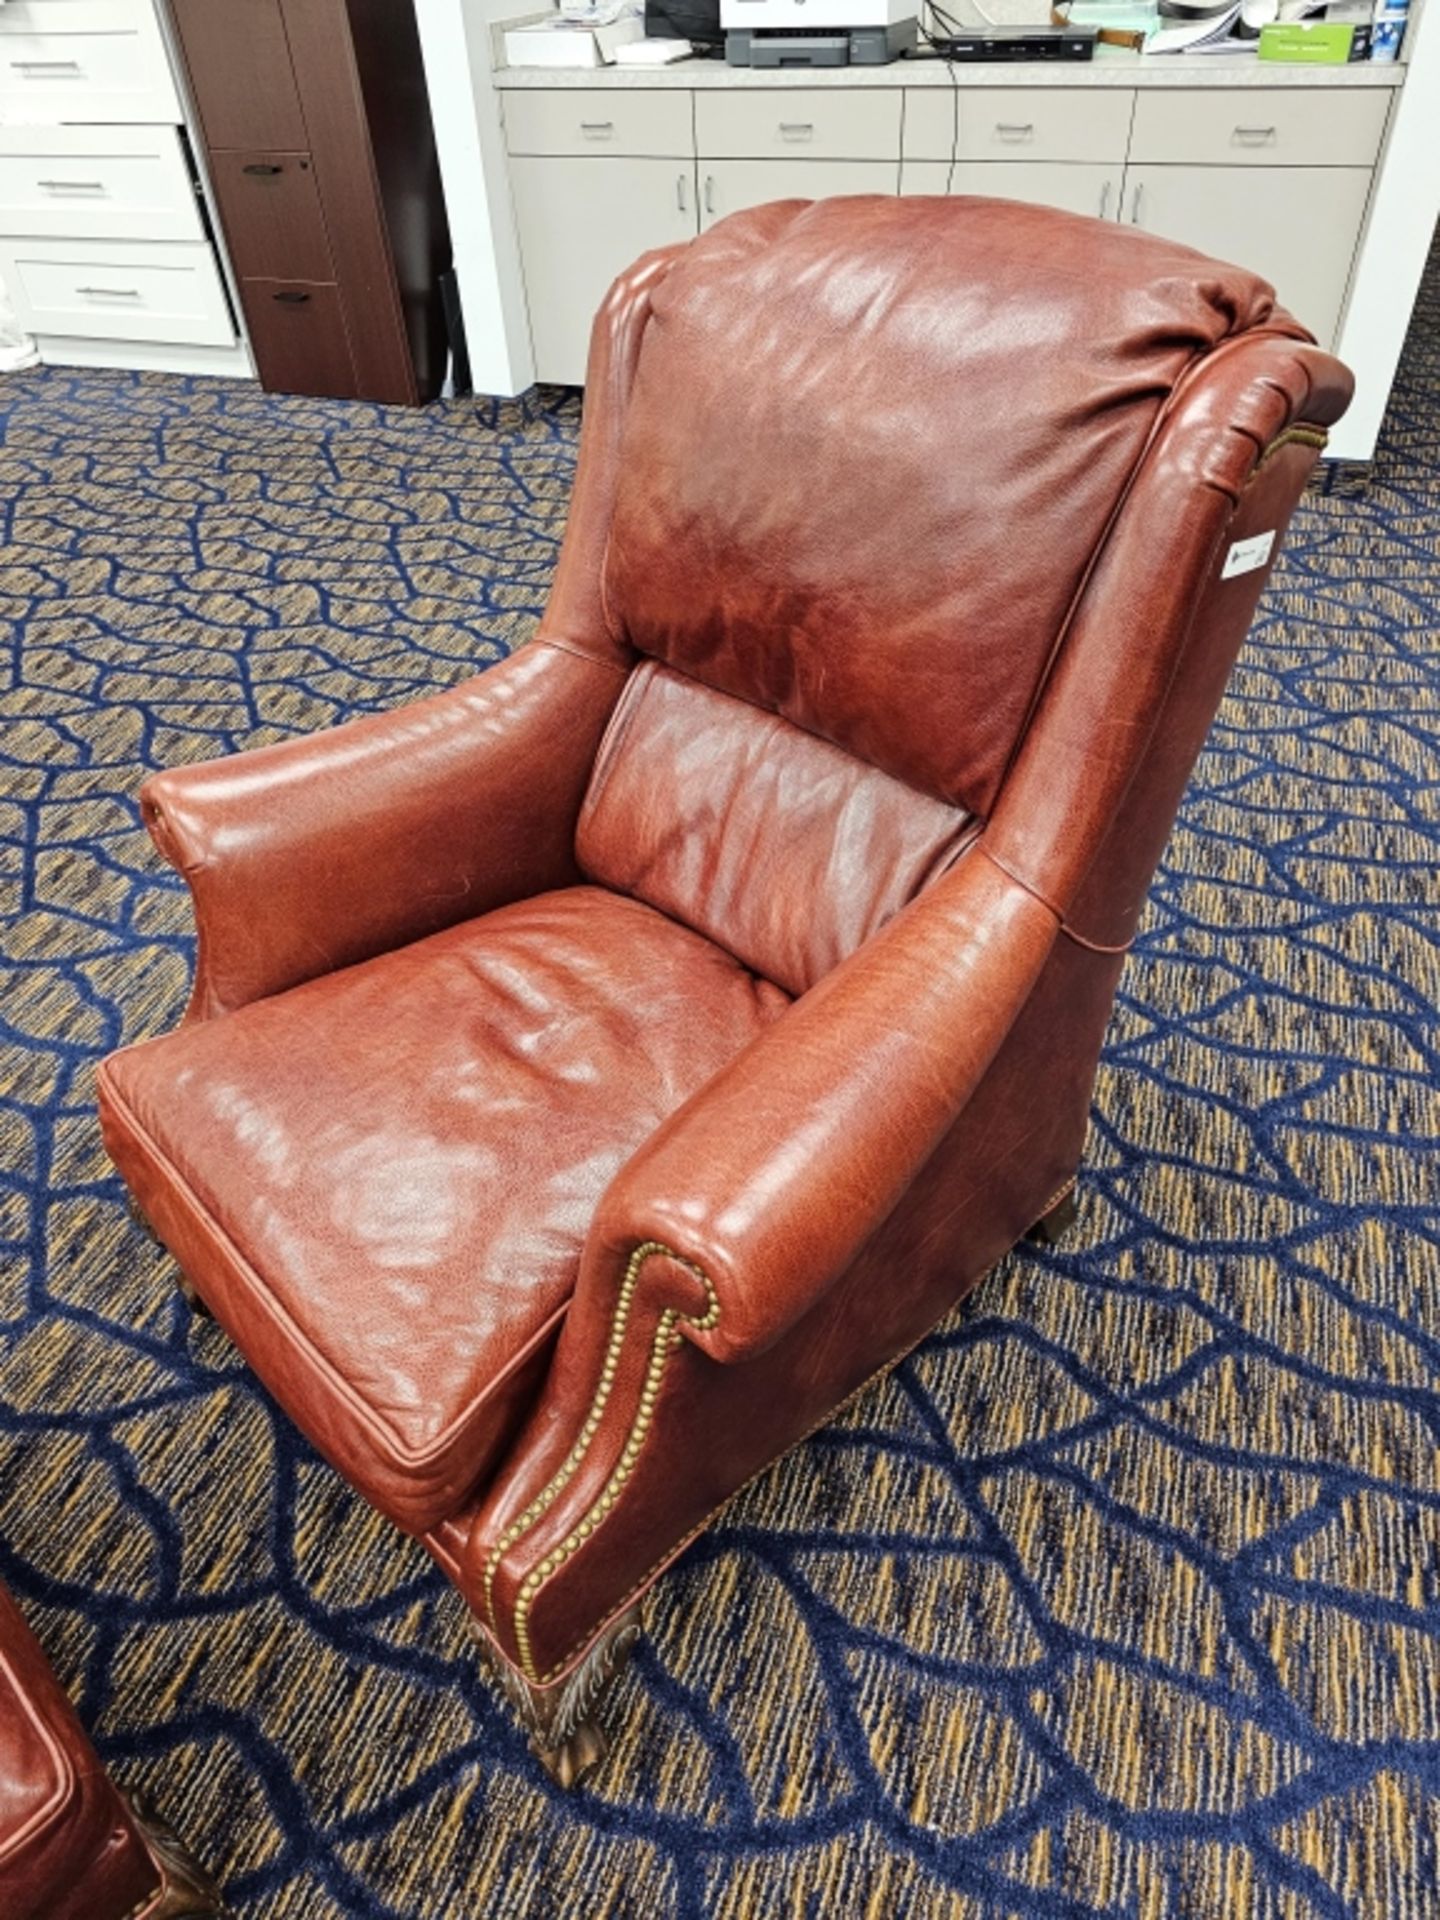 (2) Robb & Stucky Leather Chairs With Foot Stools - Image 8 of 11